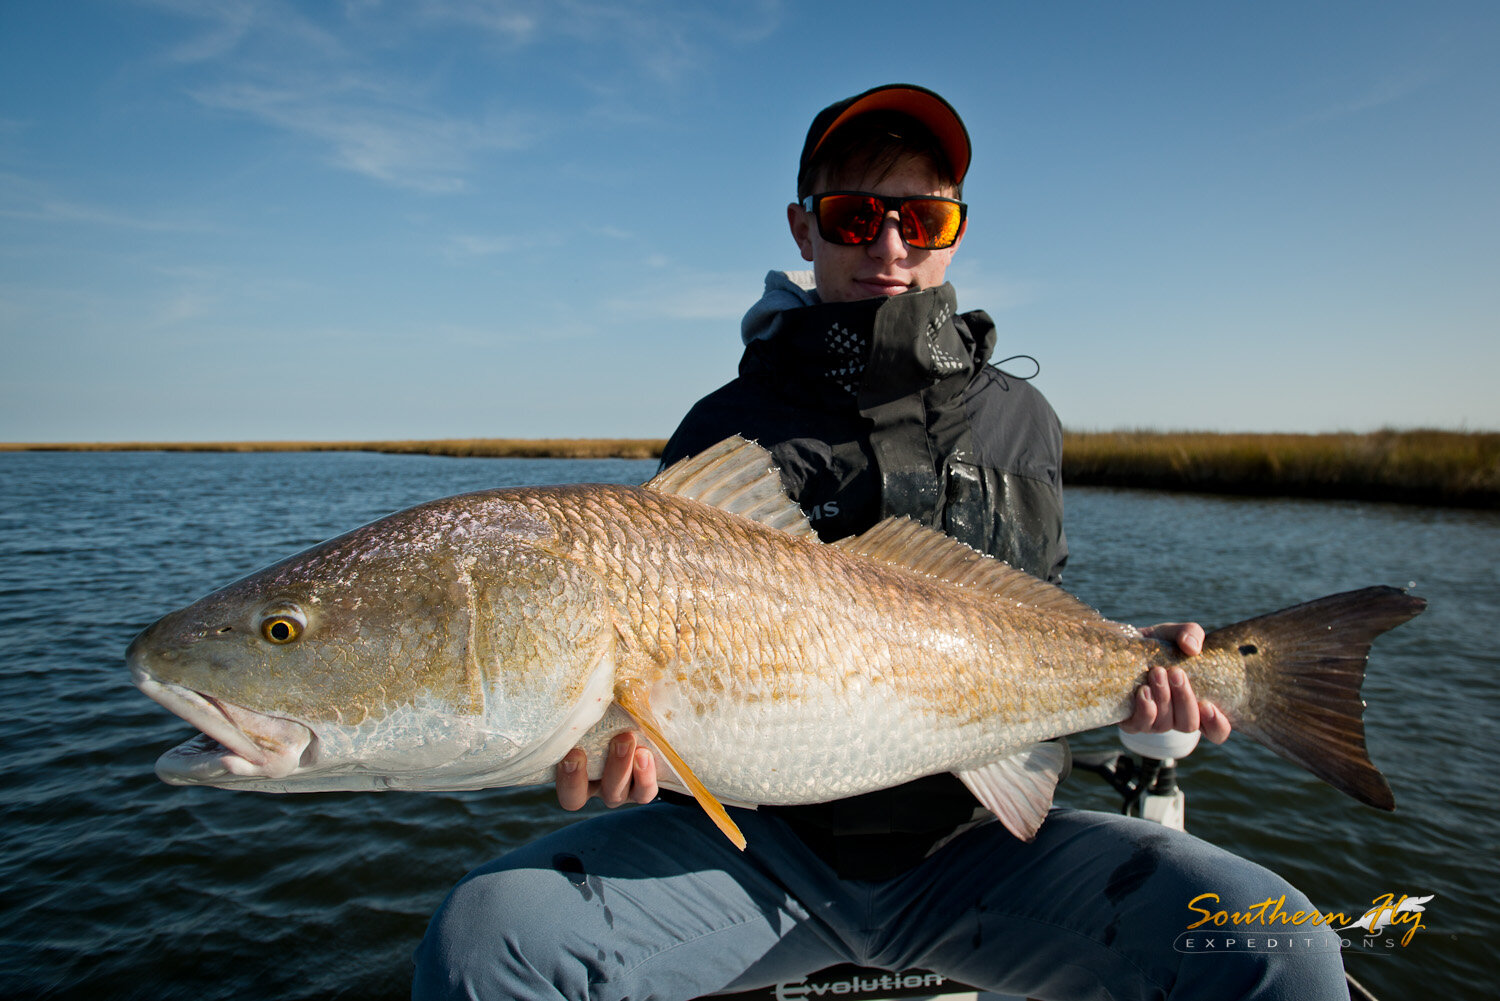 2019-11-28_SouthernFlyExpeditions_NewOrleans_MarcyOdell-3.jpg